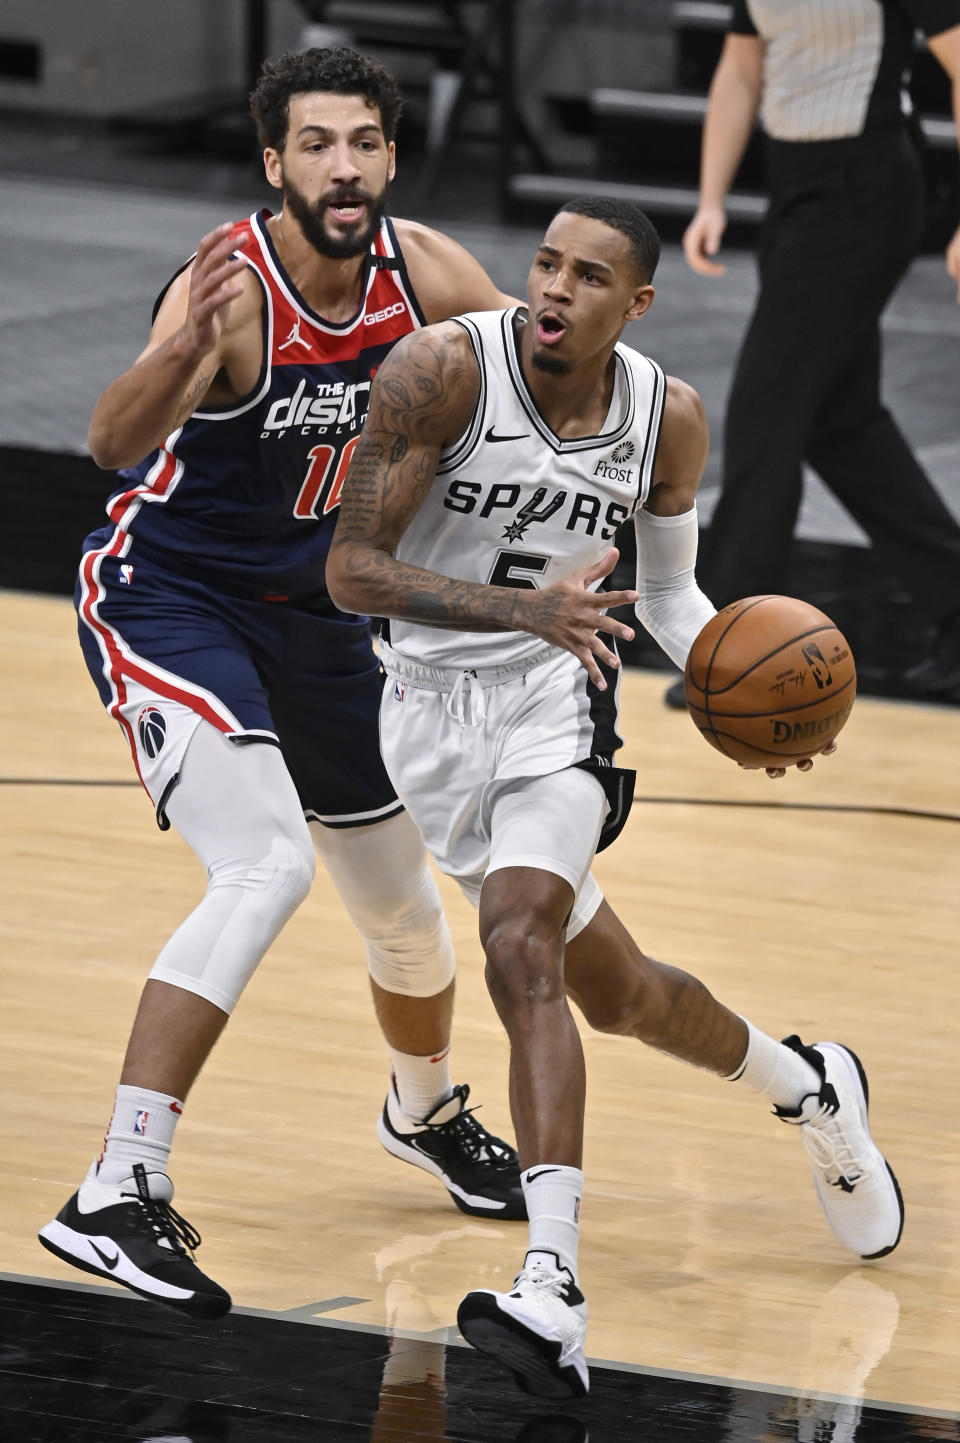 San Antonio Spurs' Dejounte Murray, right, drives around Washington Wizards' Anthony Gill during the first half of an NBA basketball game, Sunday, Jan. 24, 2021, in San Antonio. (AP Photo/Darren Abate)